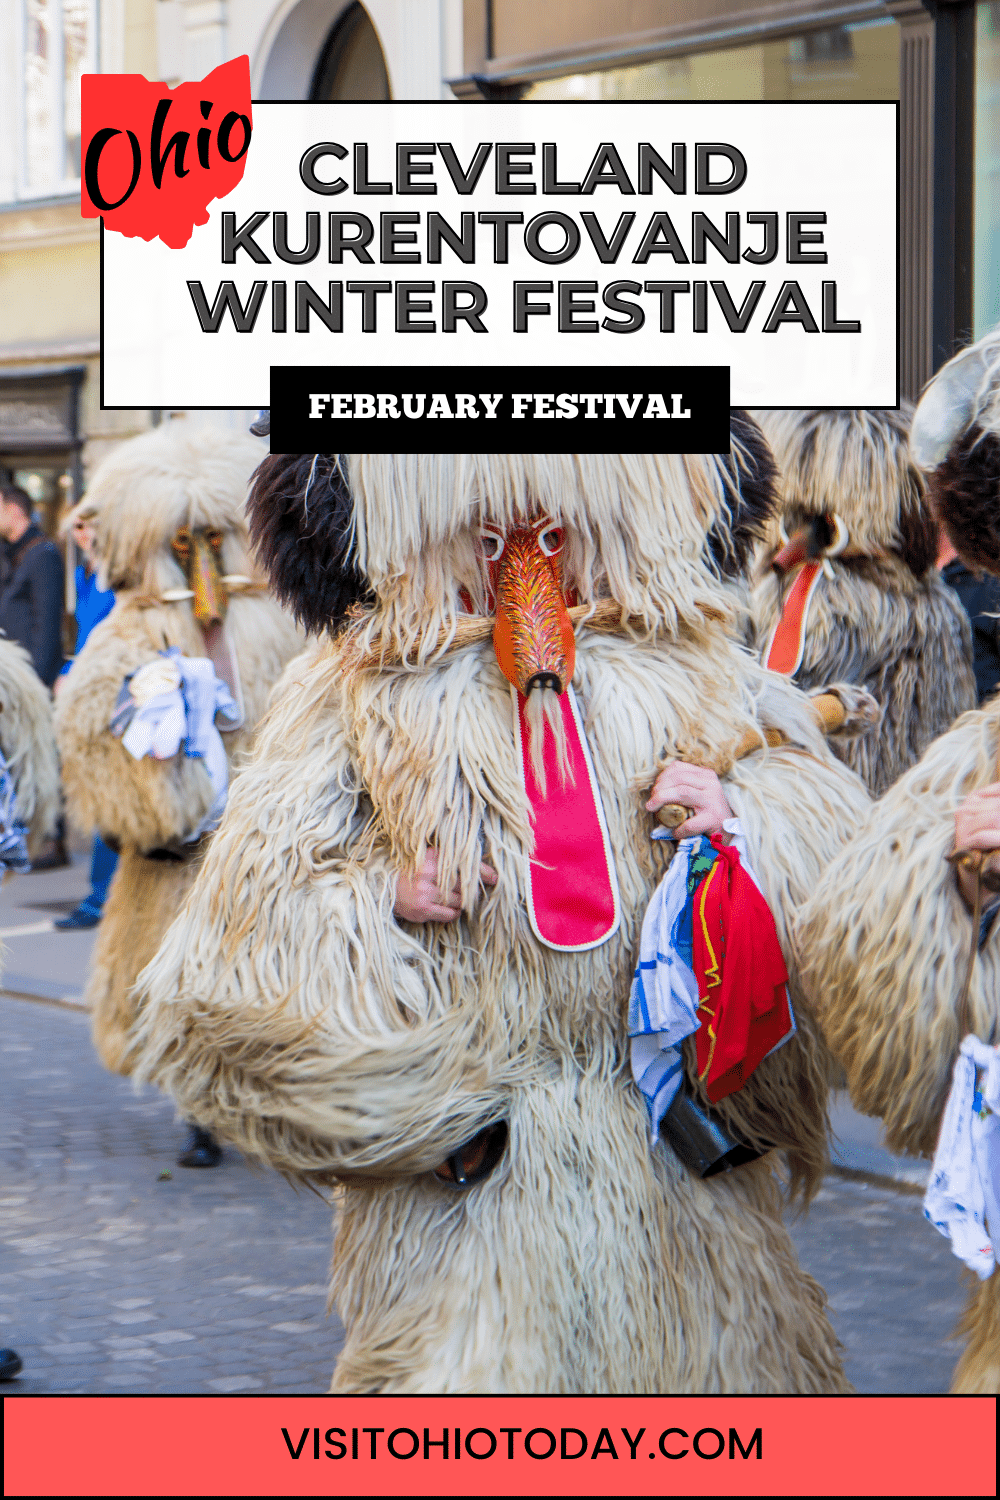 The annual Cleveland Kurentovanje Winter Festival celebrates Slovenian heritage, the end of winter, and the beginning of spring.